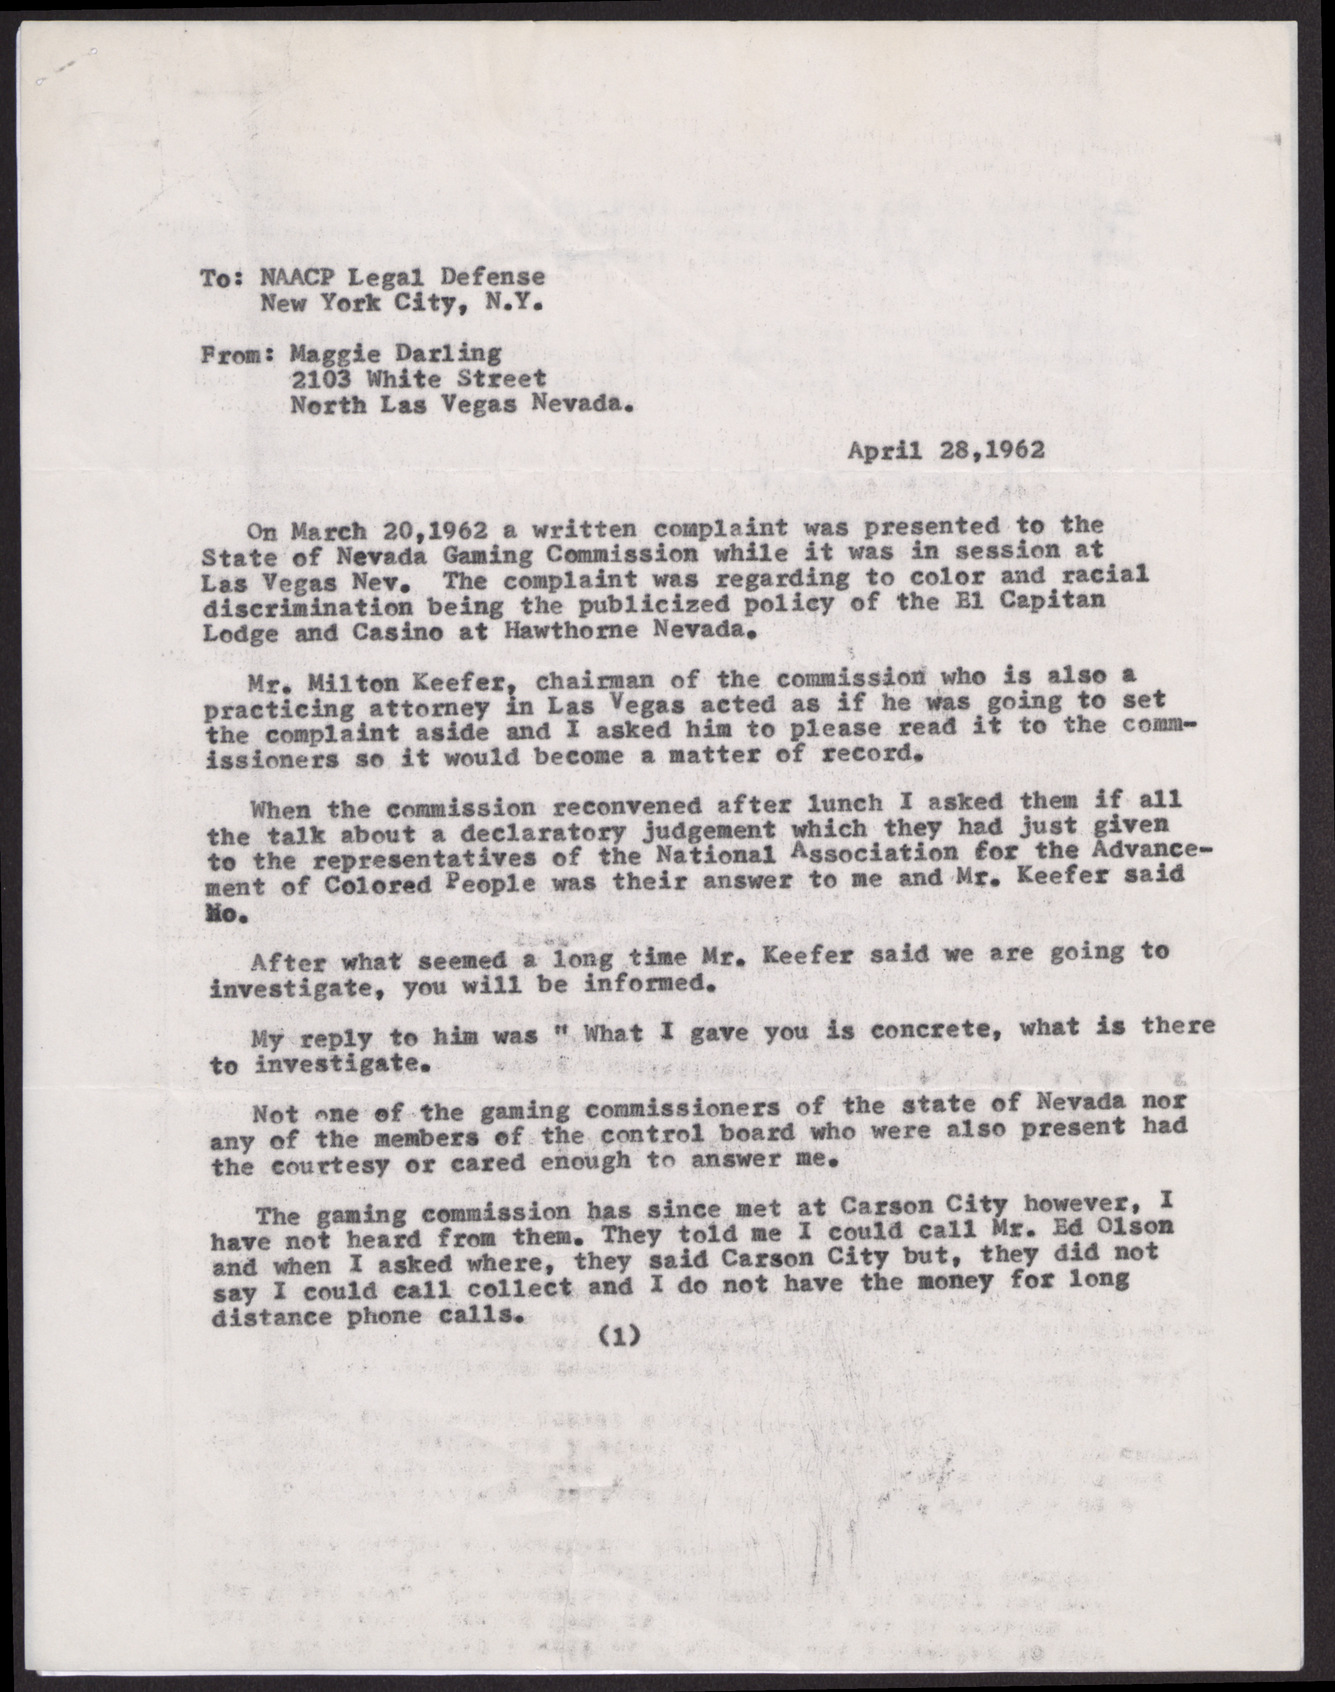 Letter to NAACP Legal Defense from Maggie Thurnblad (2 pages), April 28, 1962